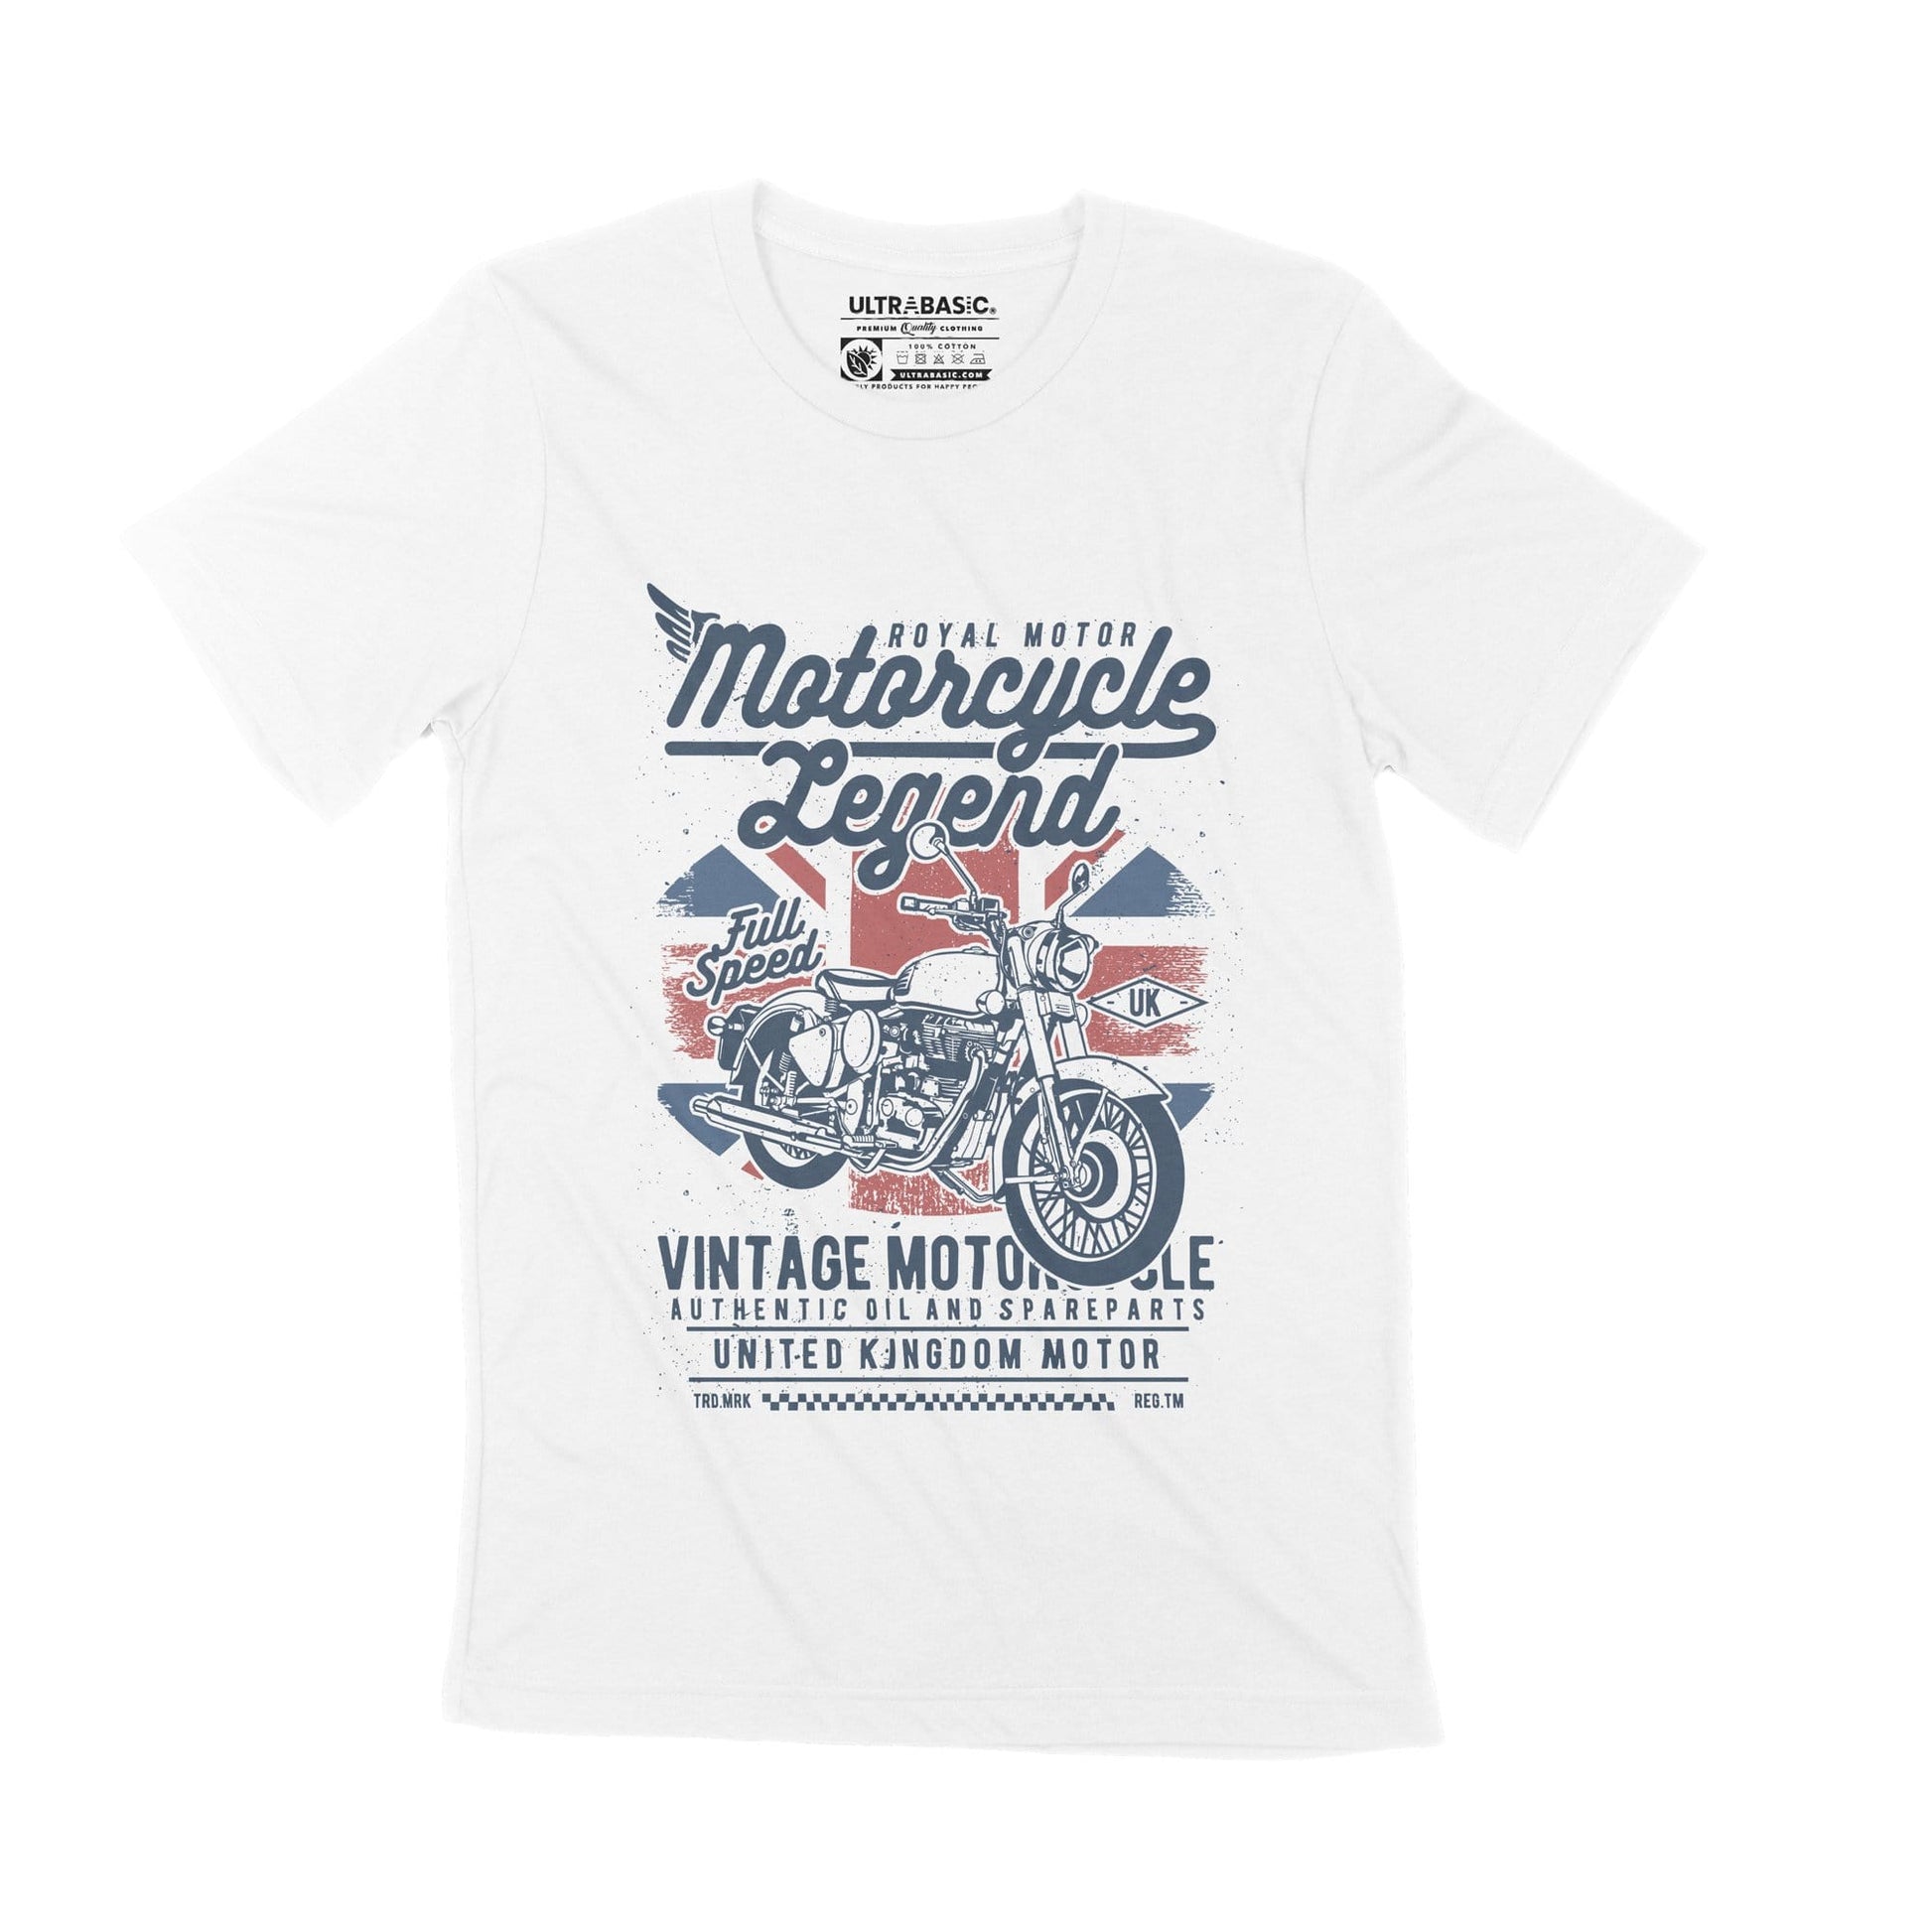 ULTRABASIC Motorcycle Legend Men's T-Shirt - Vintage Motorbike Graphic Tee best engine club clothing men outdoor mechanic victory outfits usa guy apparel road live simply tees unisex tshirts rock genuine live cafe racer indian motorcycles dad bikers patches fast driving casual merchandise british britain speed street